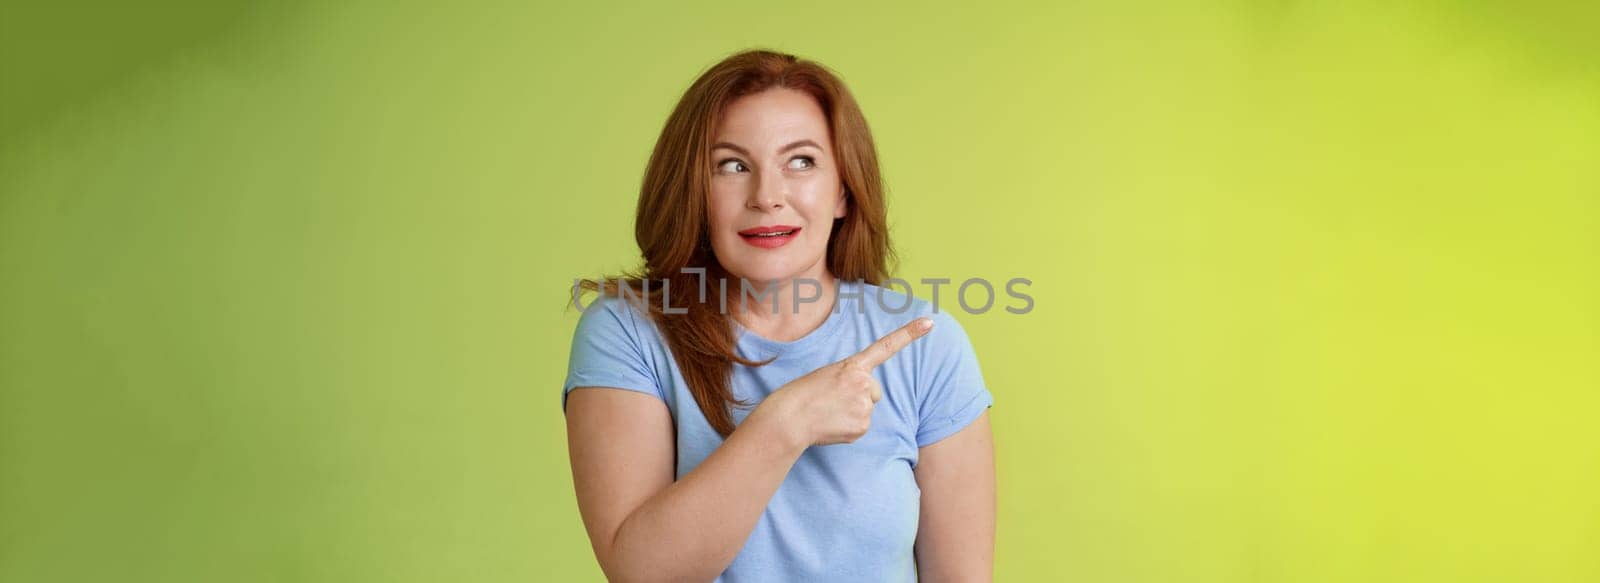 Excited intrigued middle-aged mature redhead woman. pointing gazing left side copy space curiously smiling thrilled like interesting promo willing check-out great advertisement green background.